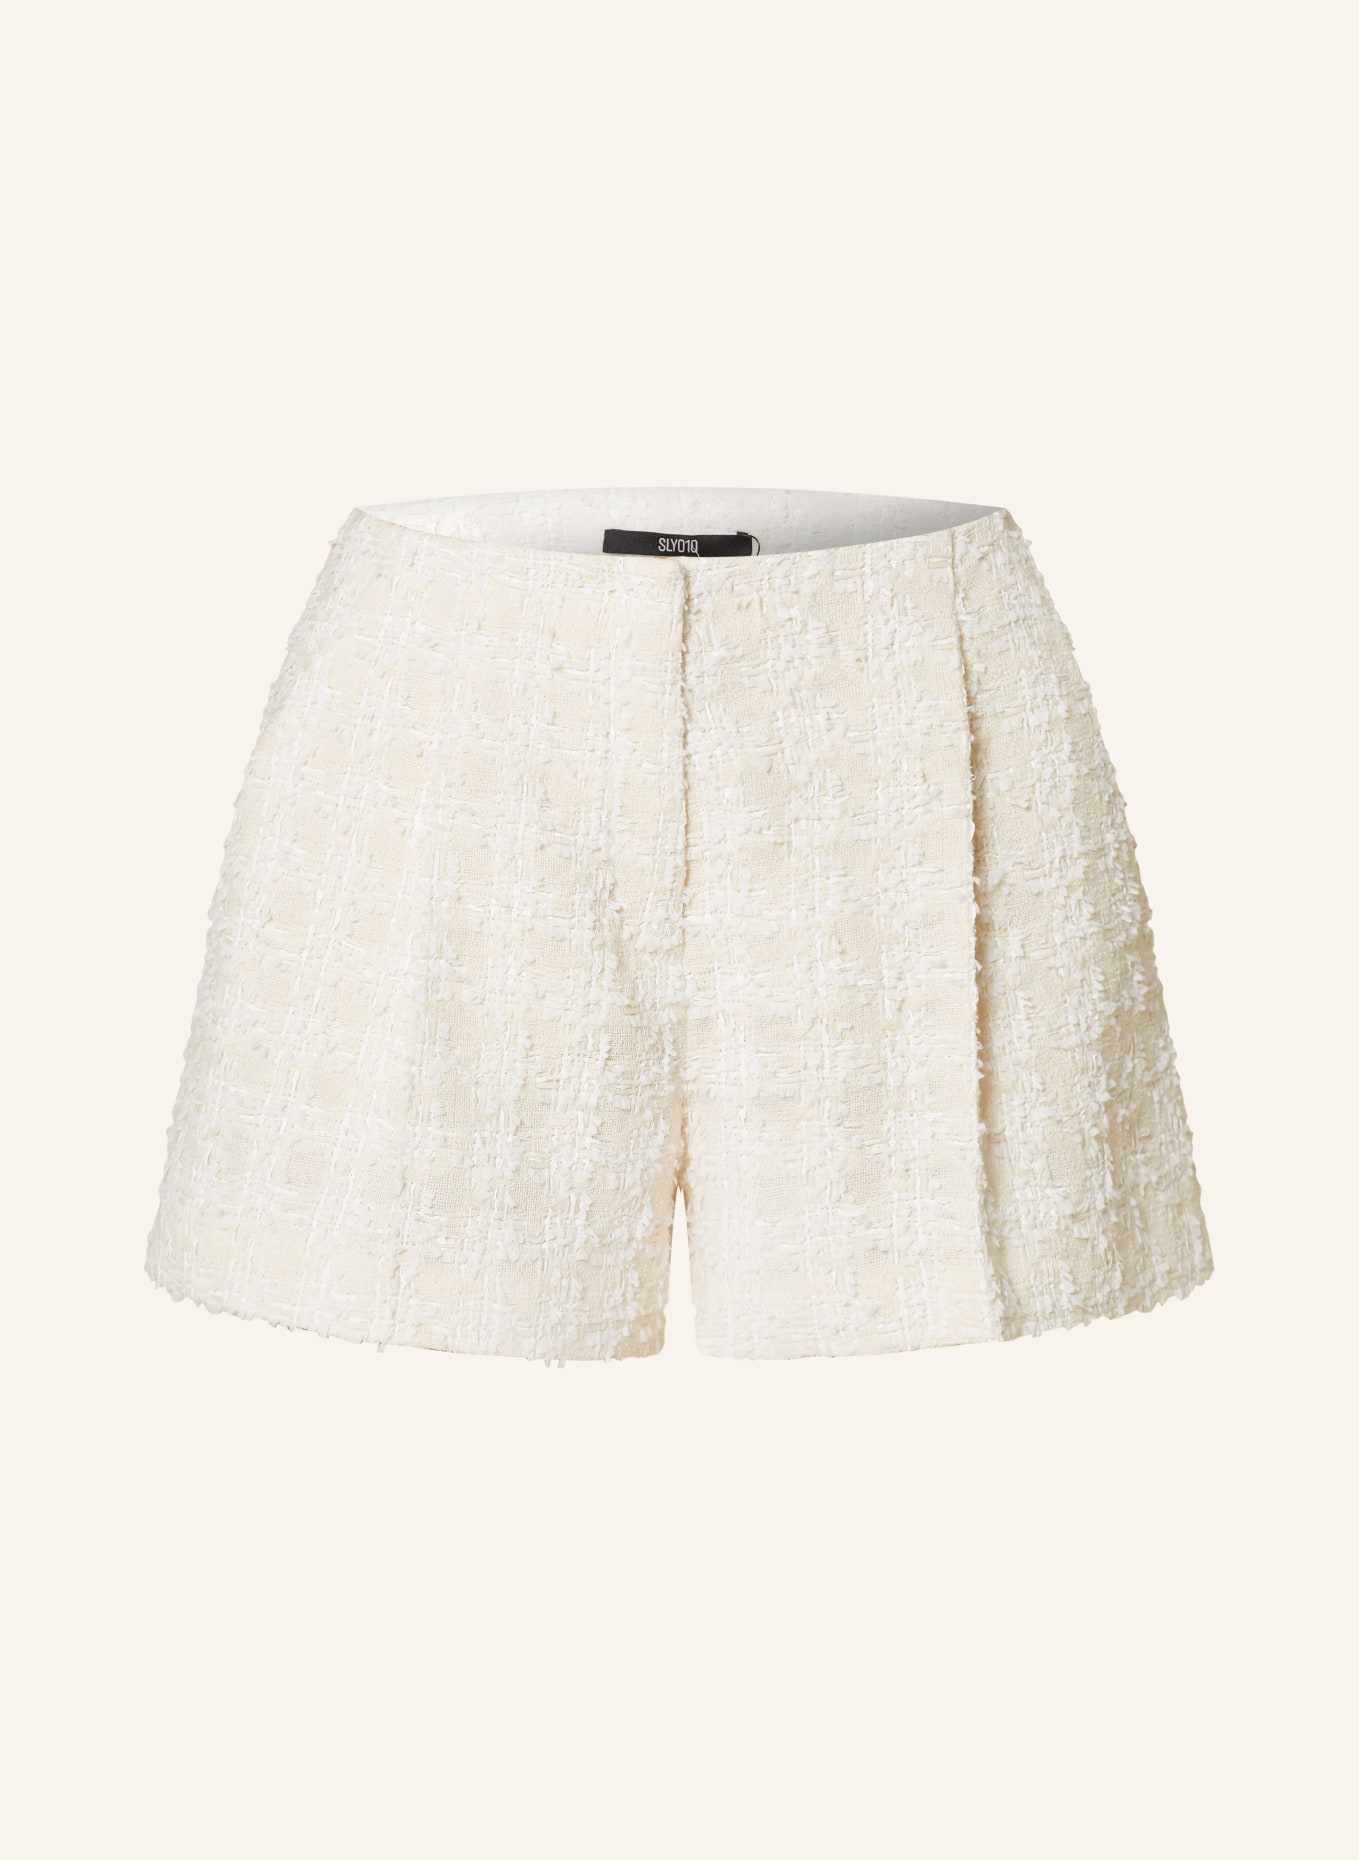 SLY 010 Tweed-Shorts ALESSIA, Farbe: CREME/ WEISS (Bild 1)